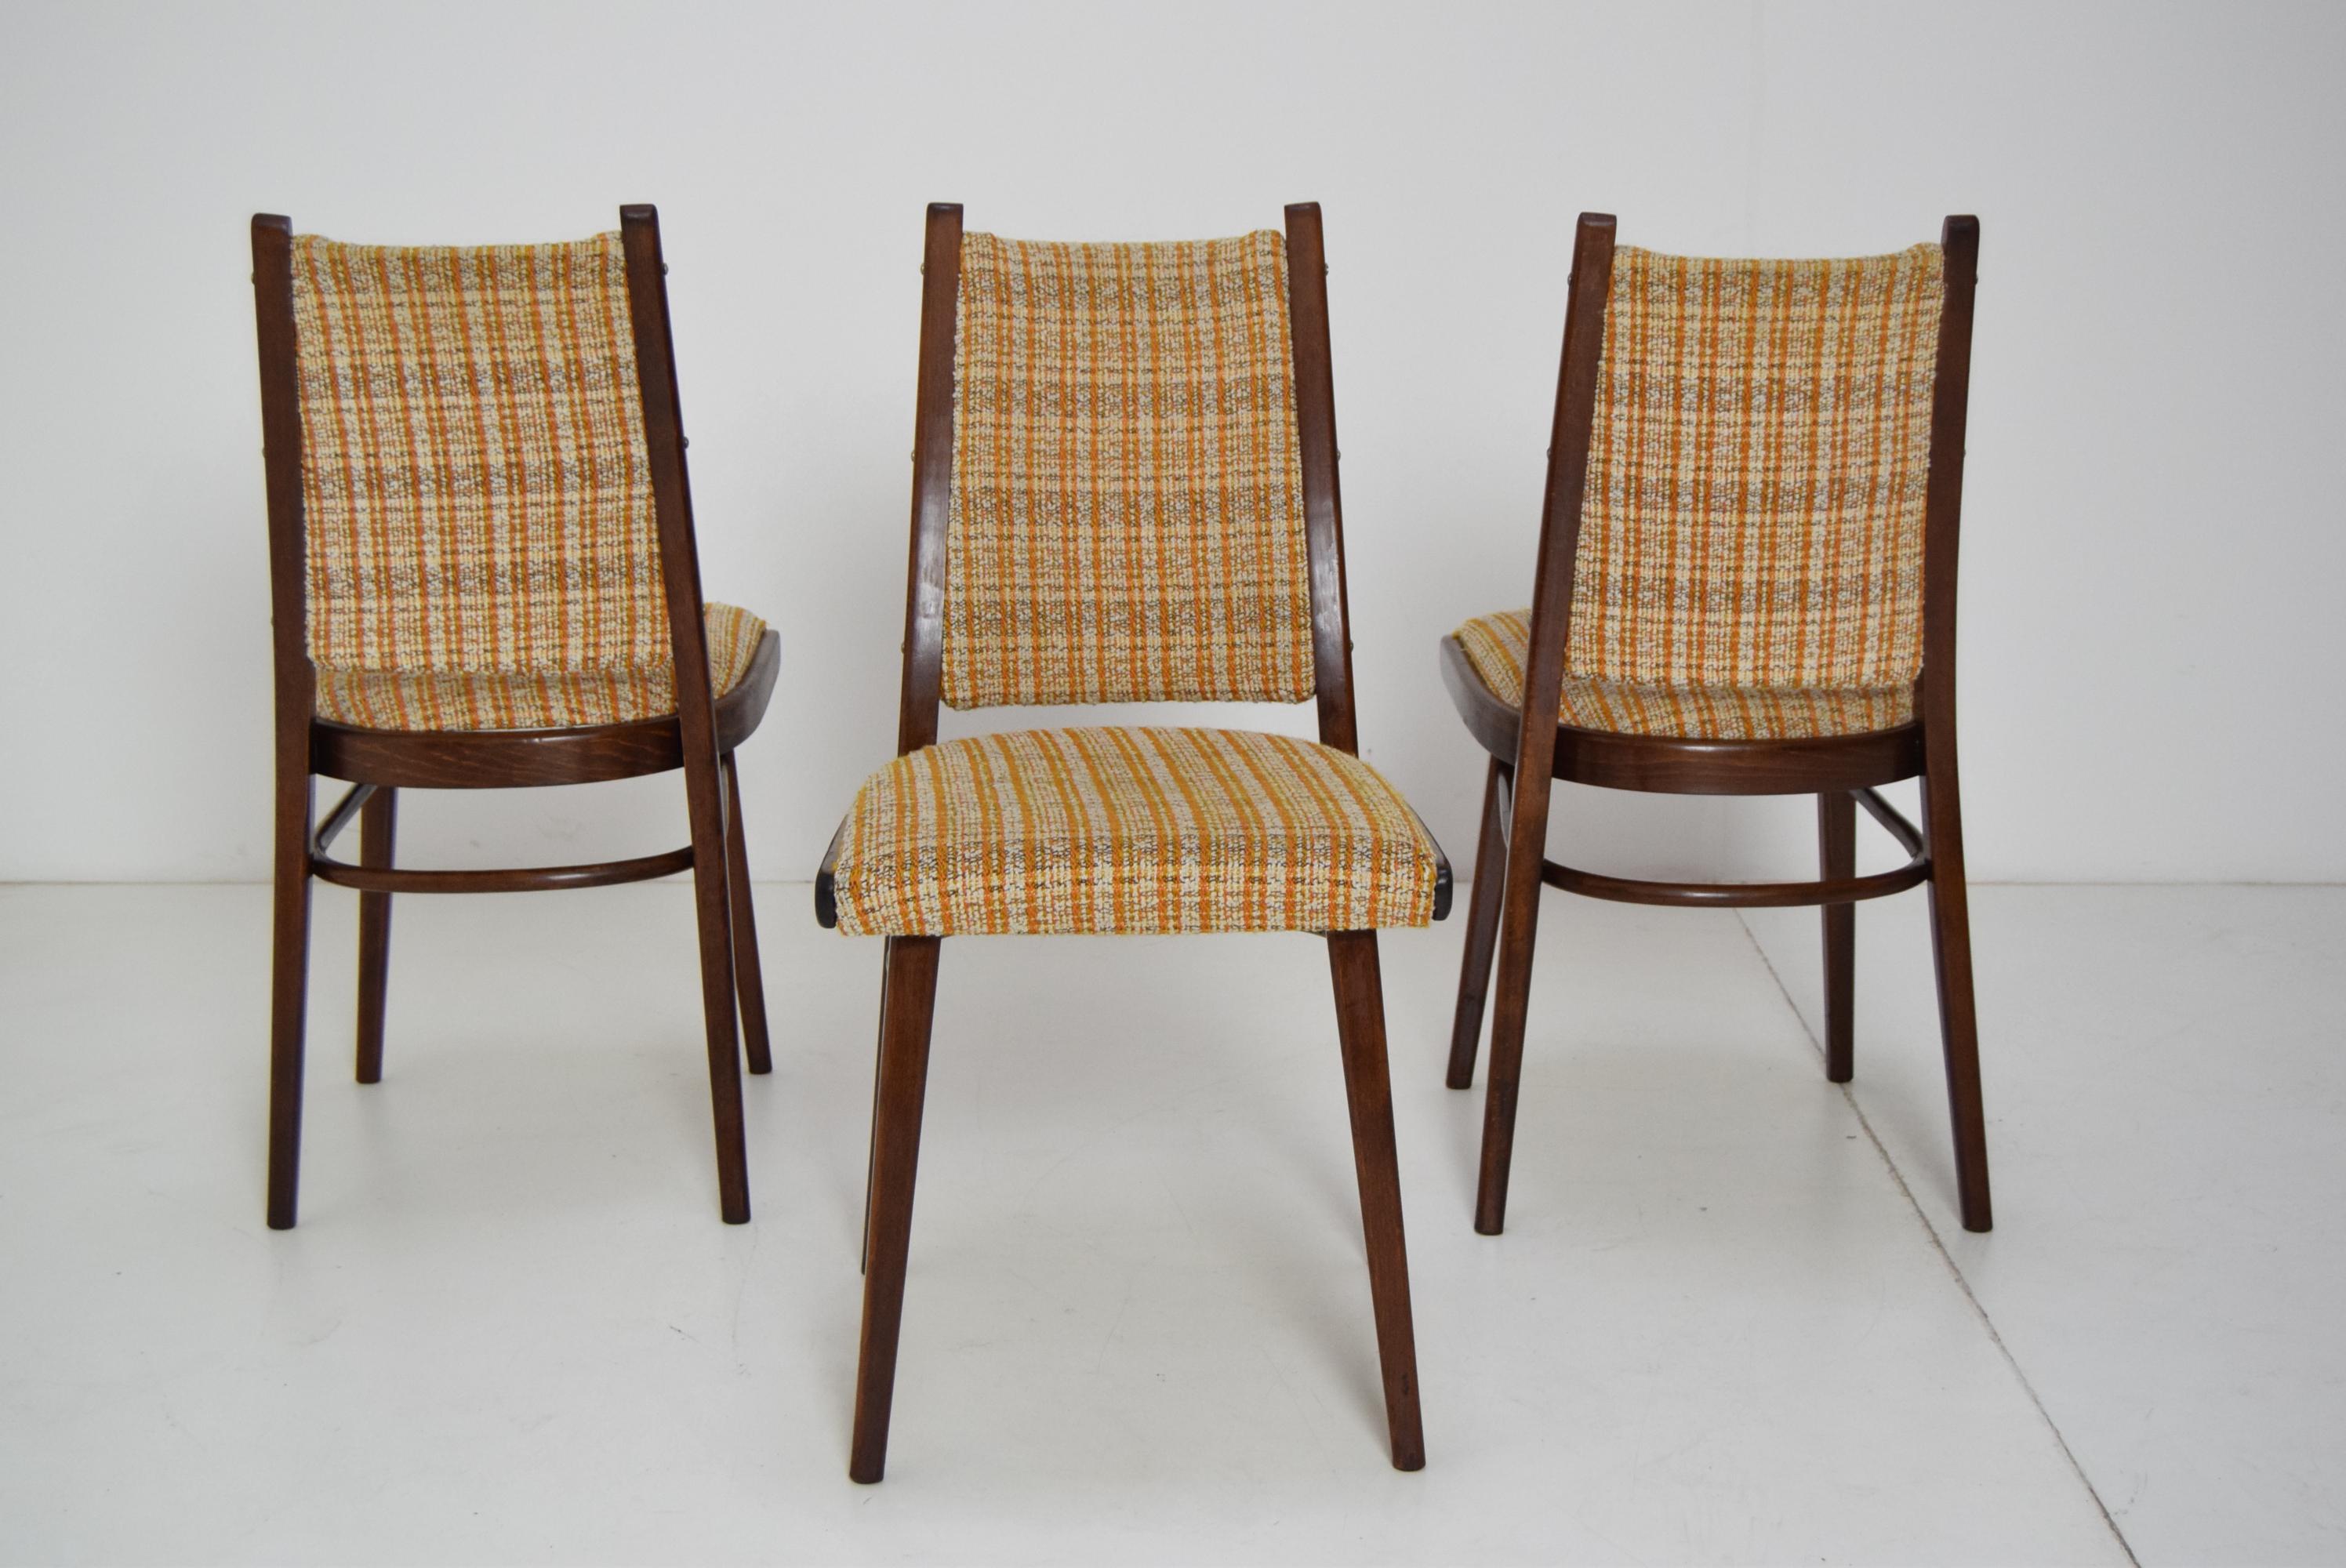 Czech Midcentury Set of Three Chairs by Ton, 1960s For Sale